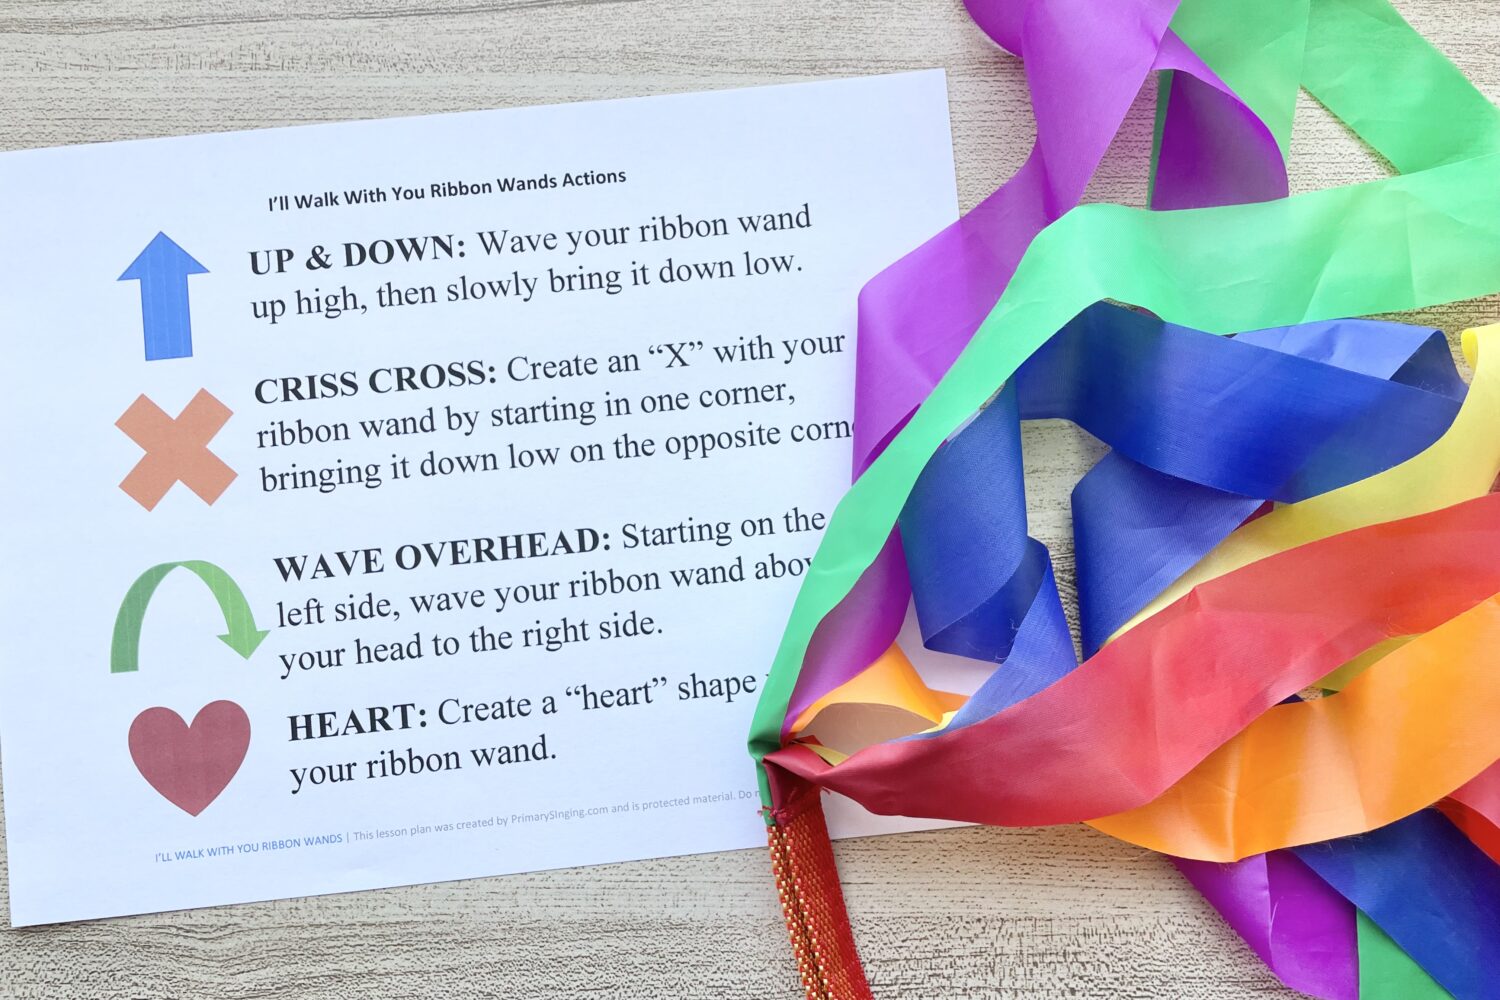 Use this fun I'll Walk With You Ribbon Wands living music primary idea for a printable ribbon wands pattern with 4 actions for LDS Primary Music Leaders.